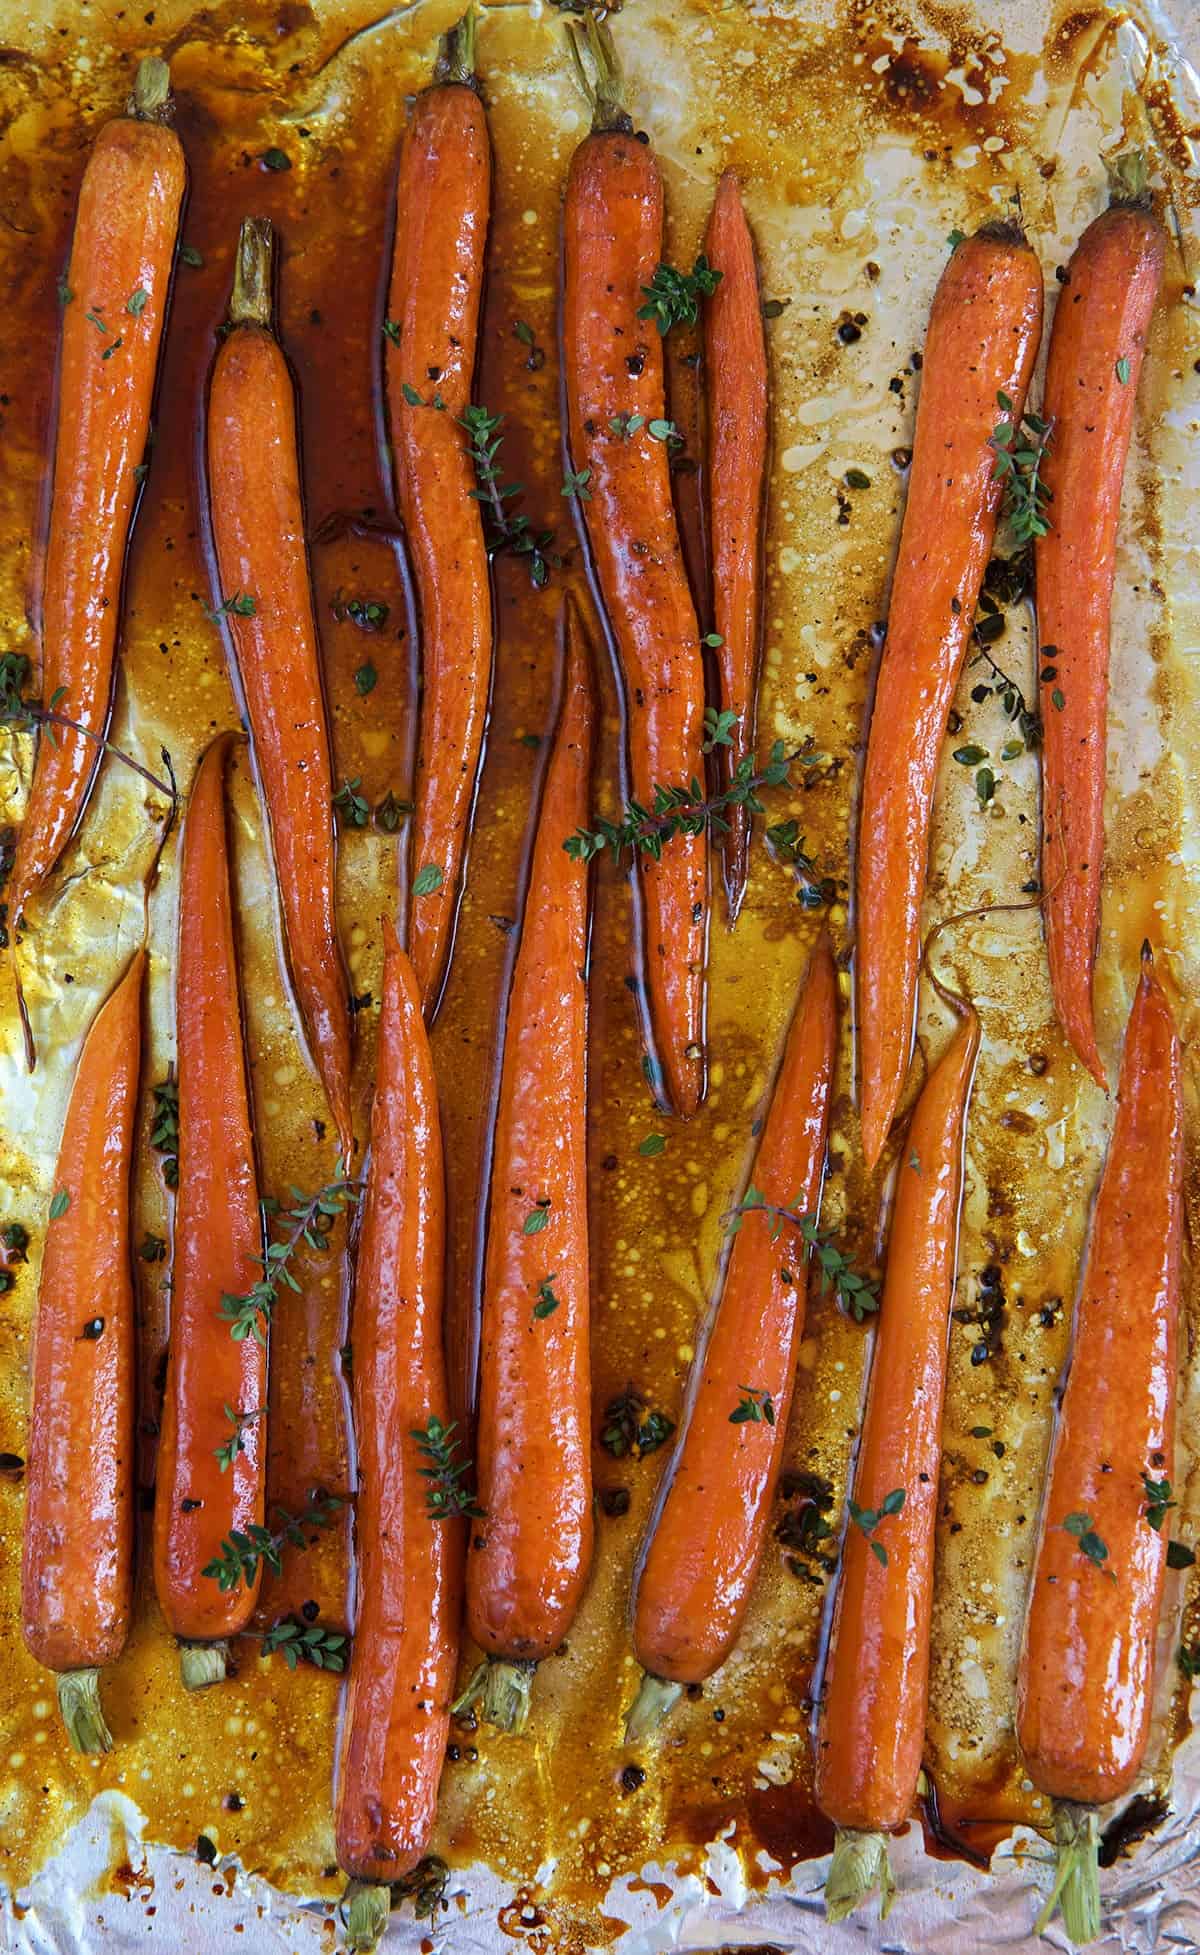 Carrots are spread out evenly on a baking sheet.